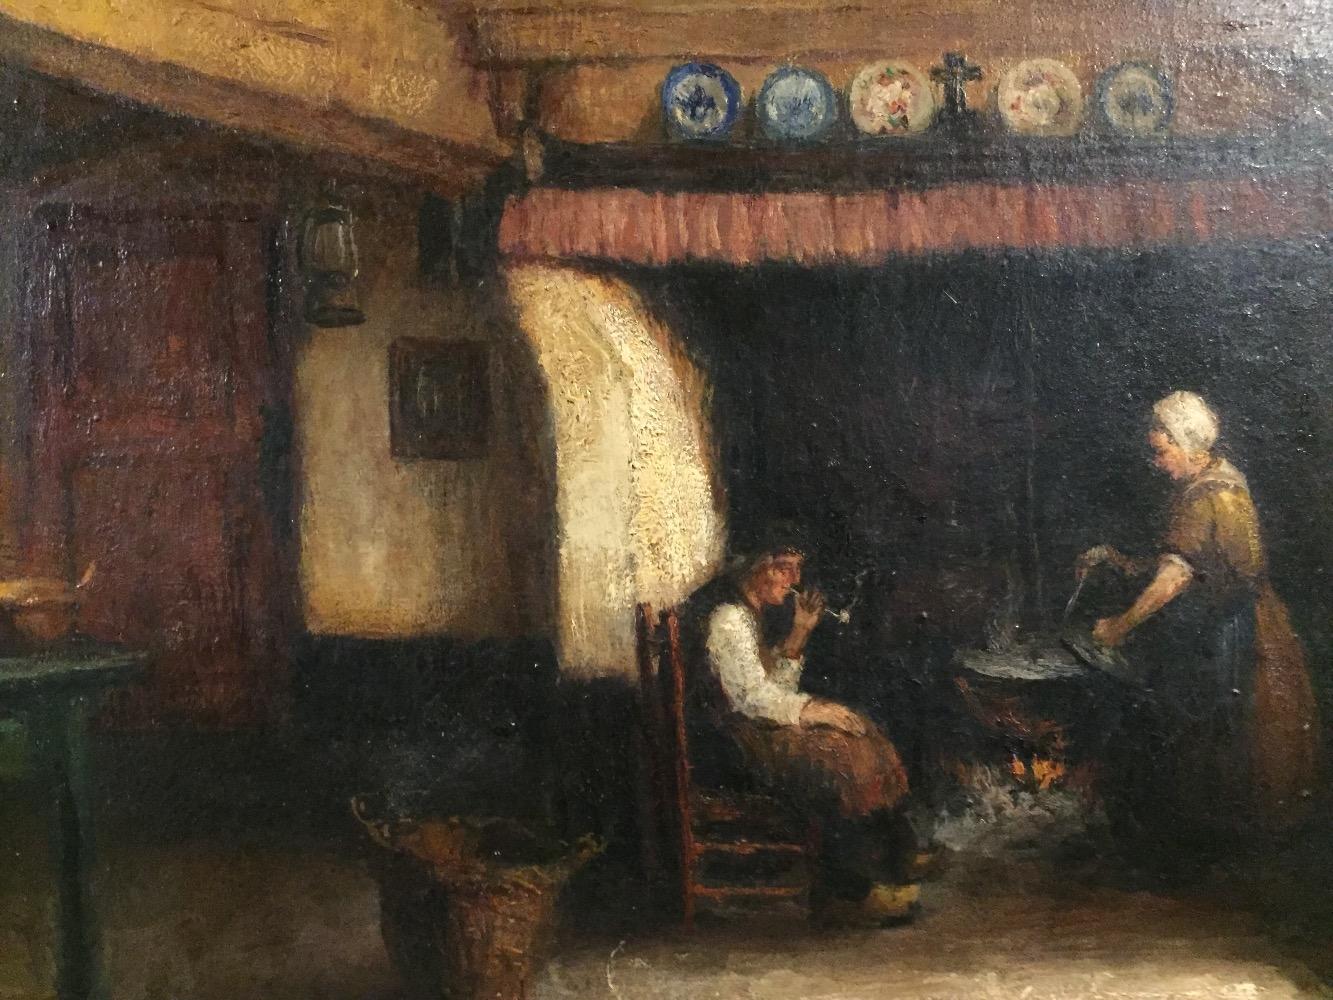 Woman and man in the kitchen